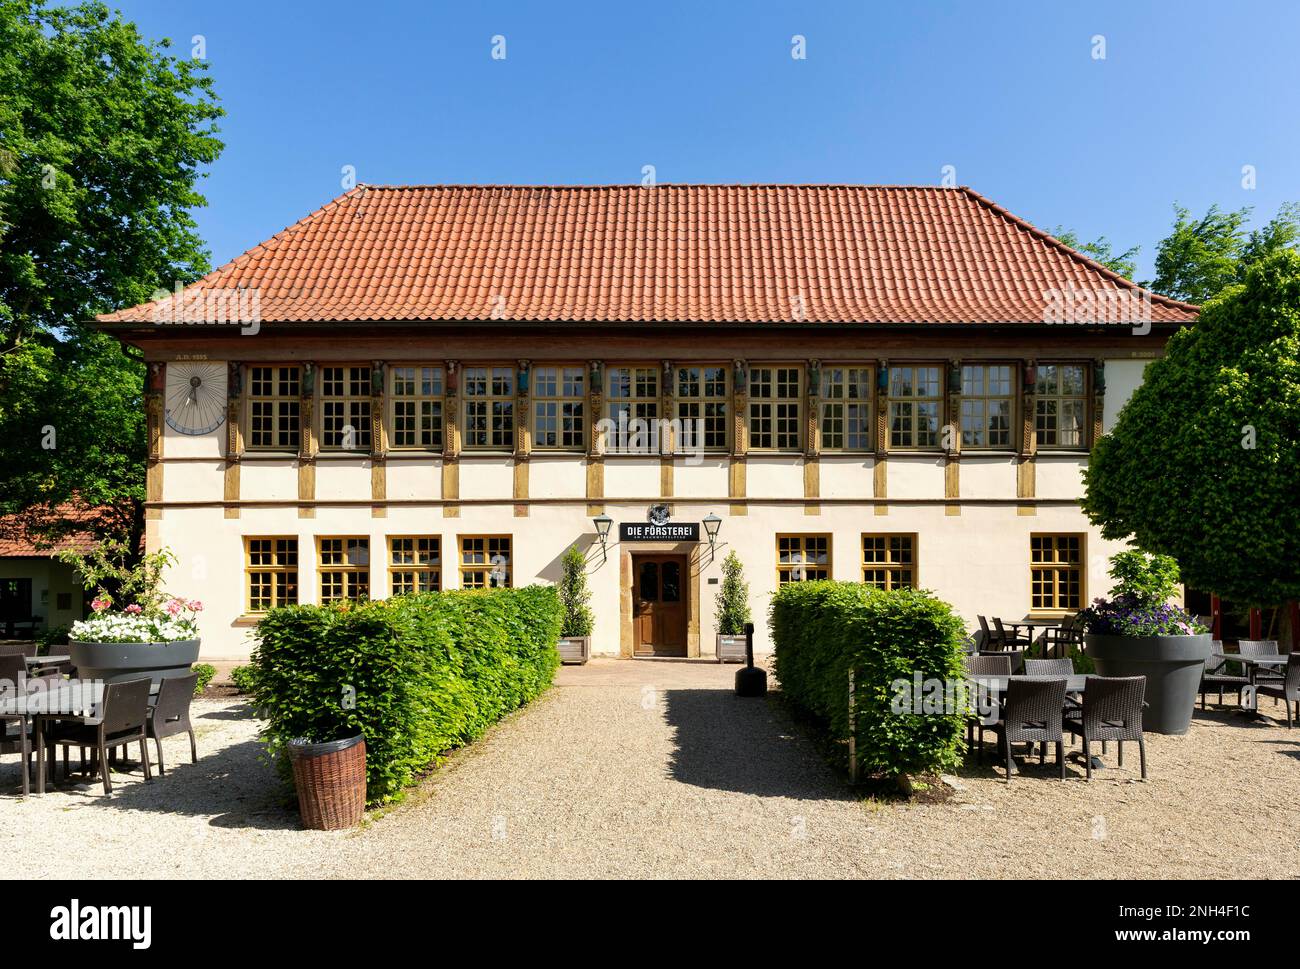 Haus Freudenthal, former tea house in the zoo, today restaurant with beer garden in the spa gardens, Bad Iburg, Lower Saxony, Germany Stock Photo